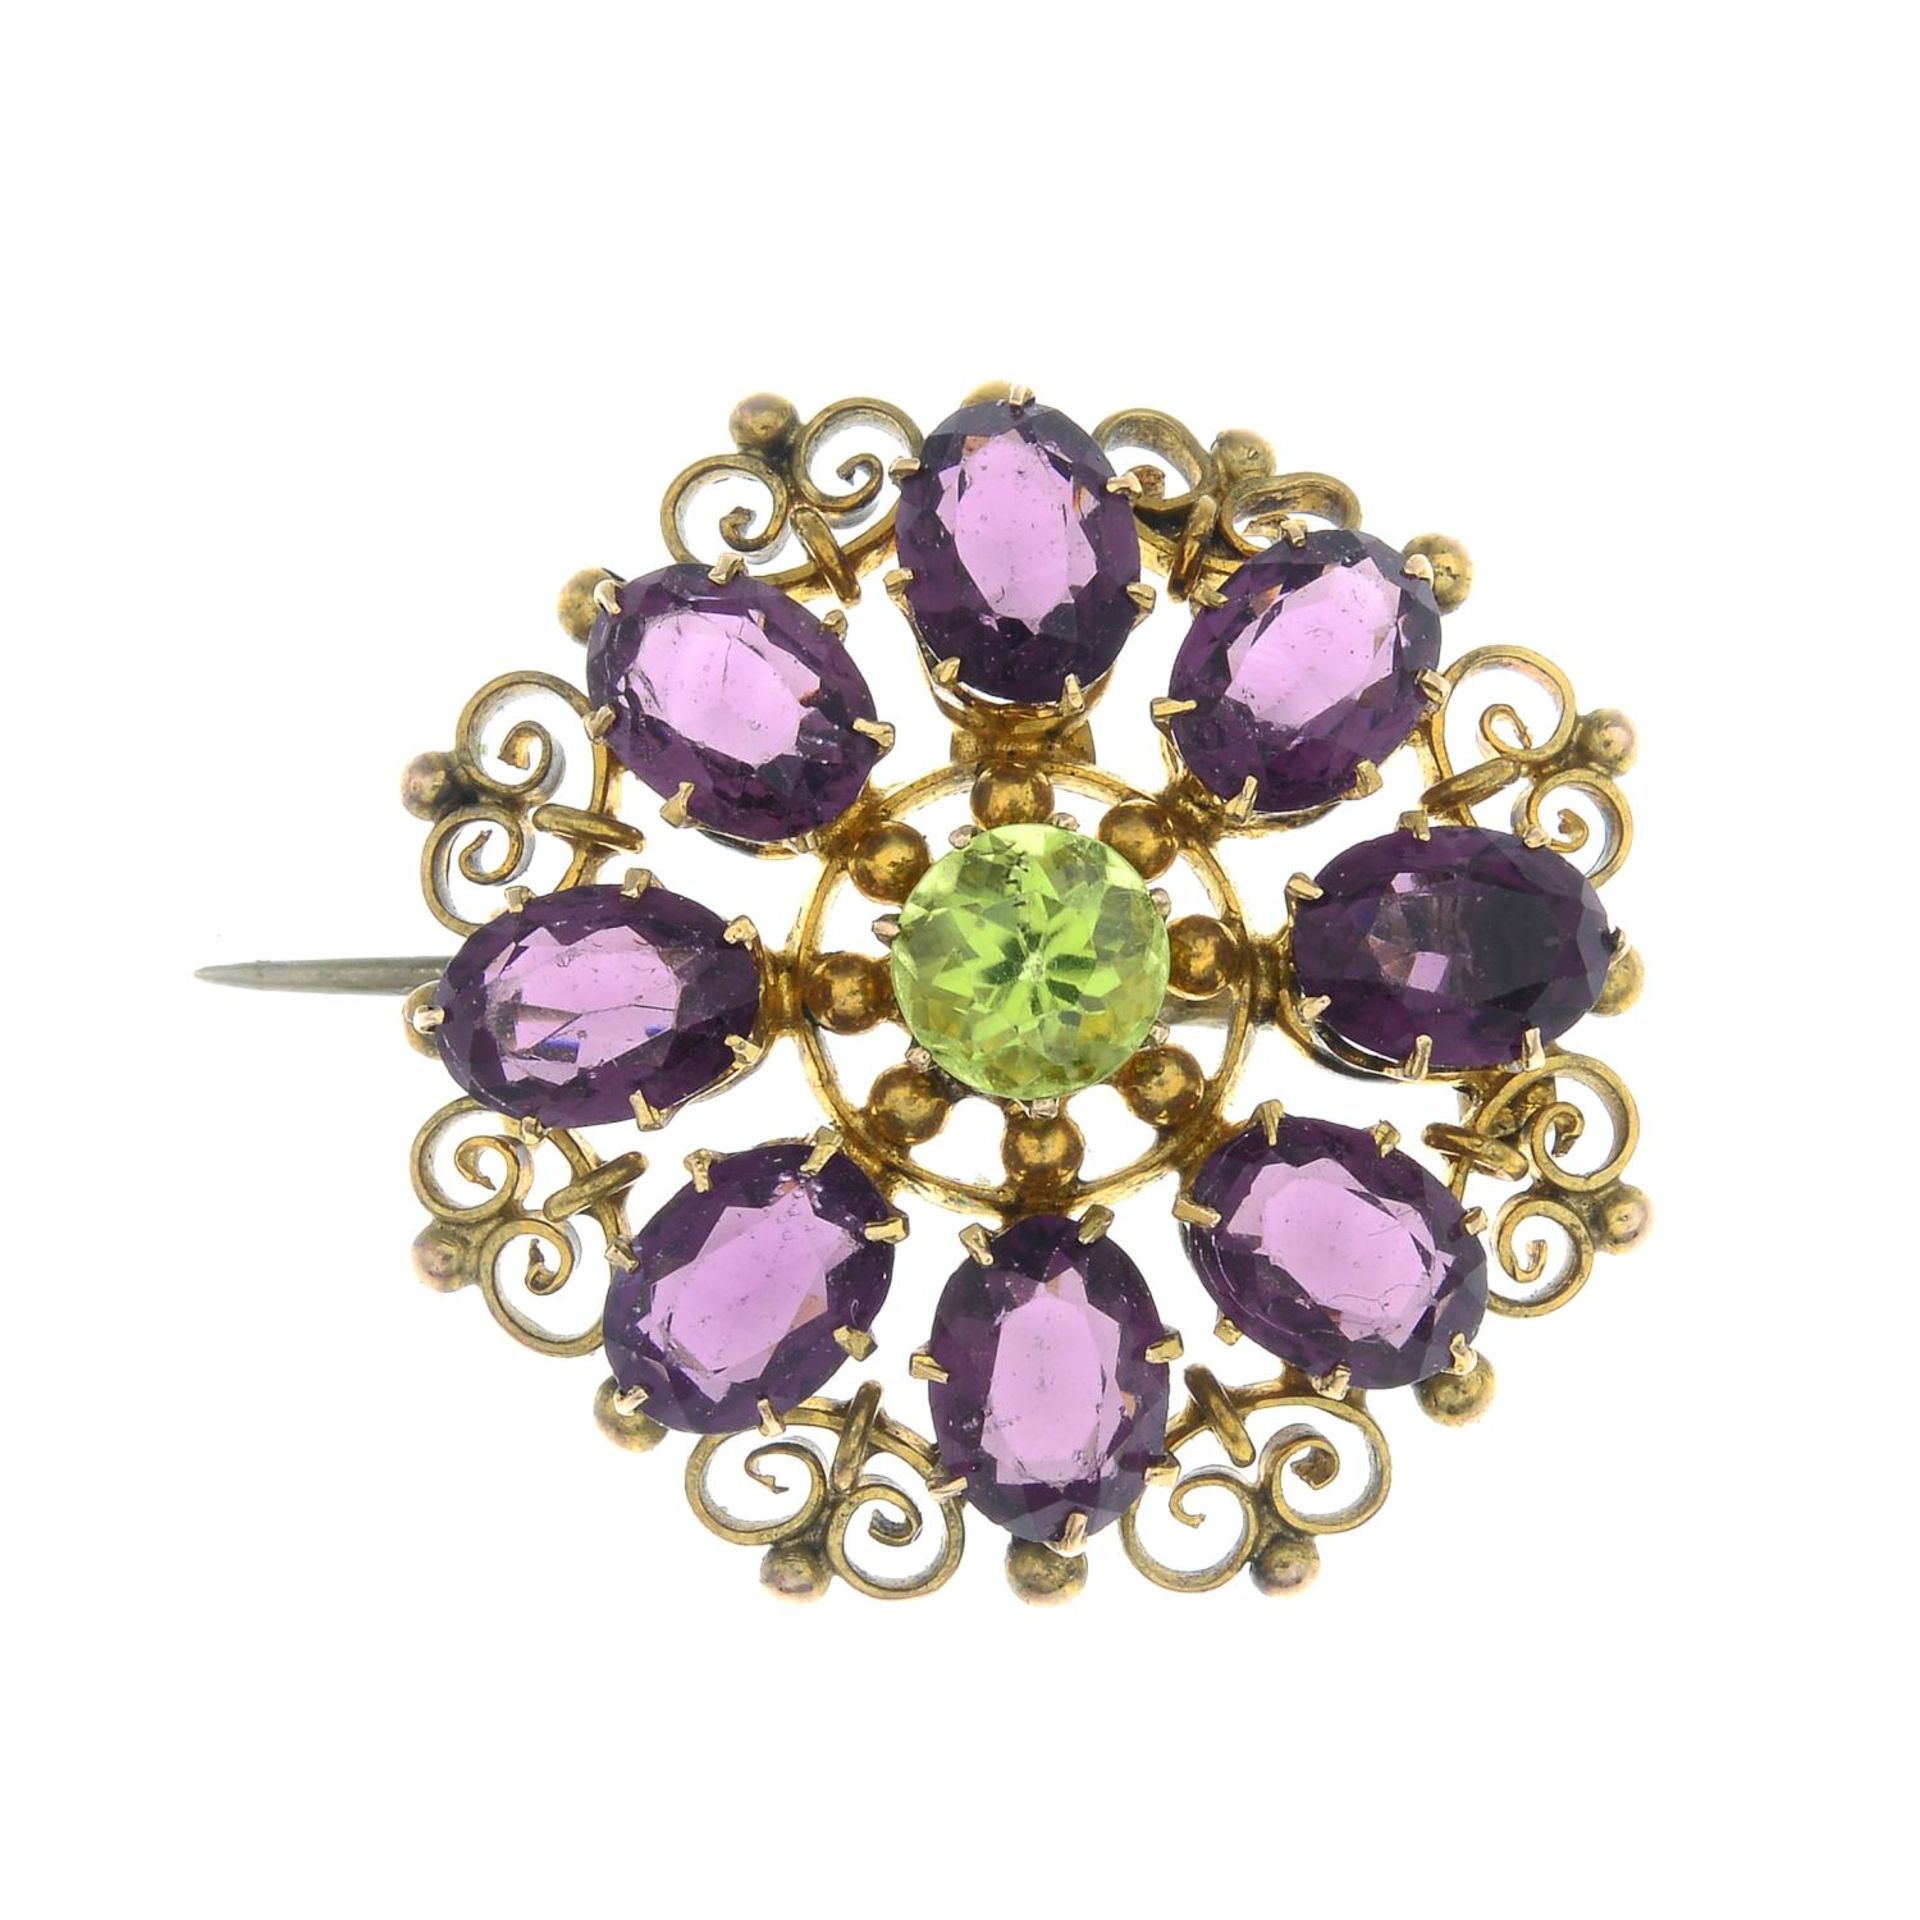 An amethyst and peridot brooch.Stamped 9CT.